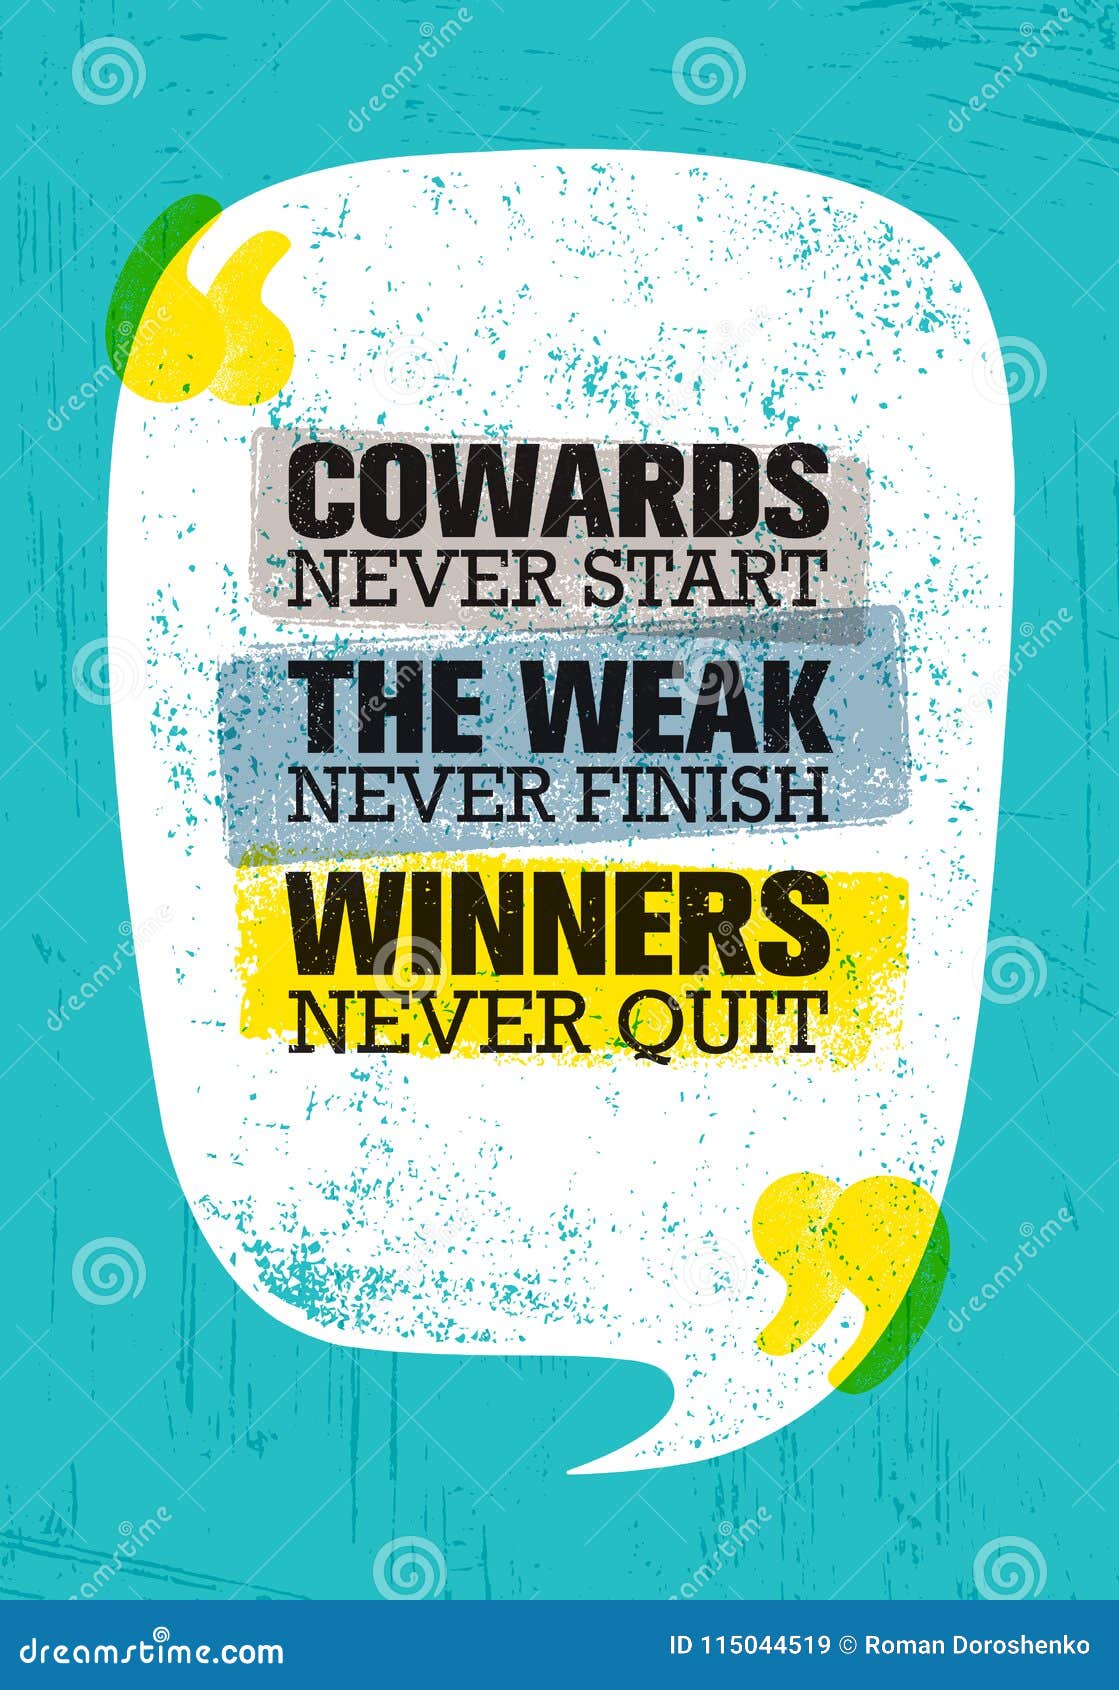 cowards never start the weak never finish winners never quit. inspiring creative motivation quote poster template